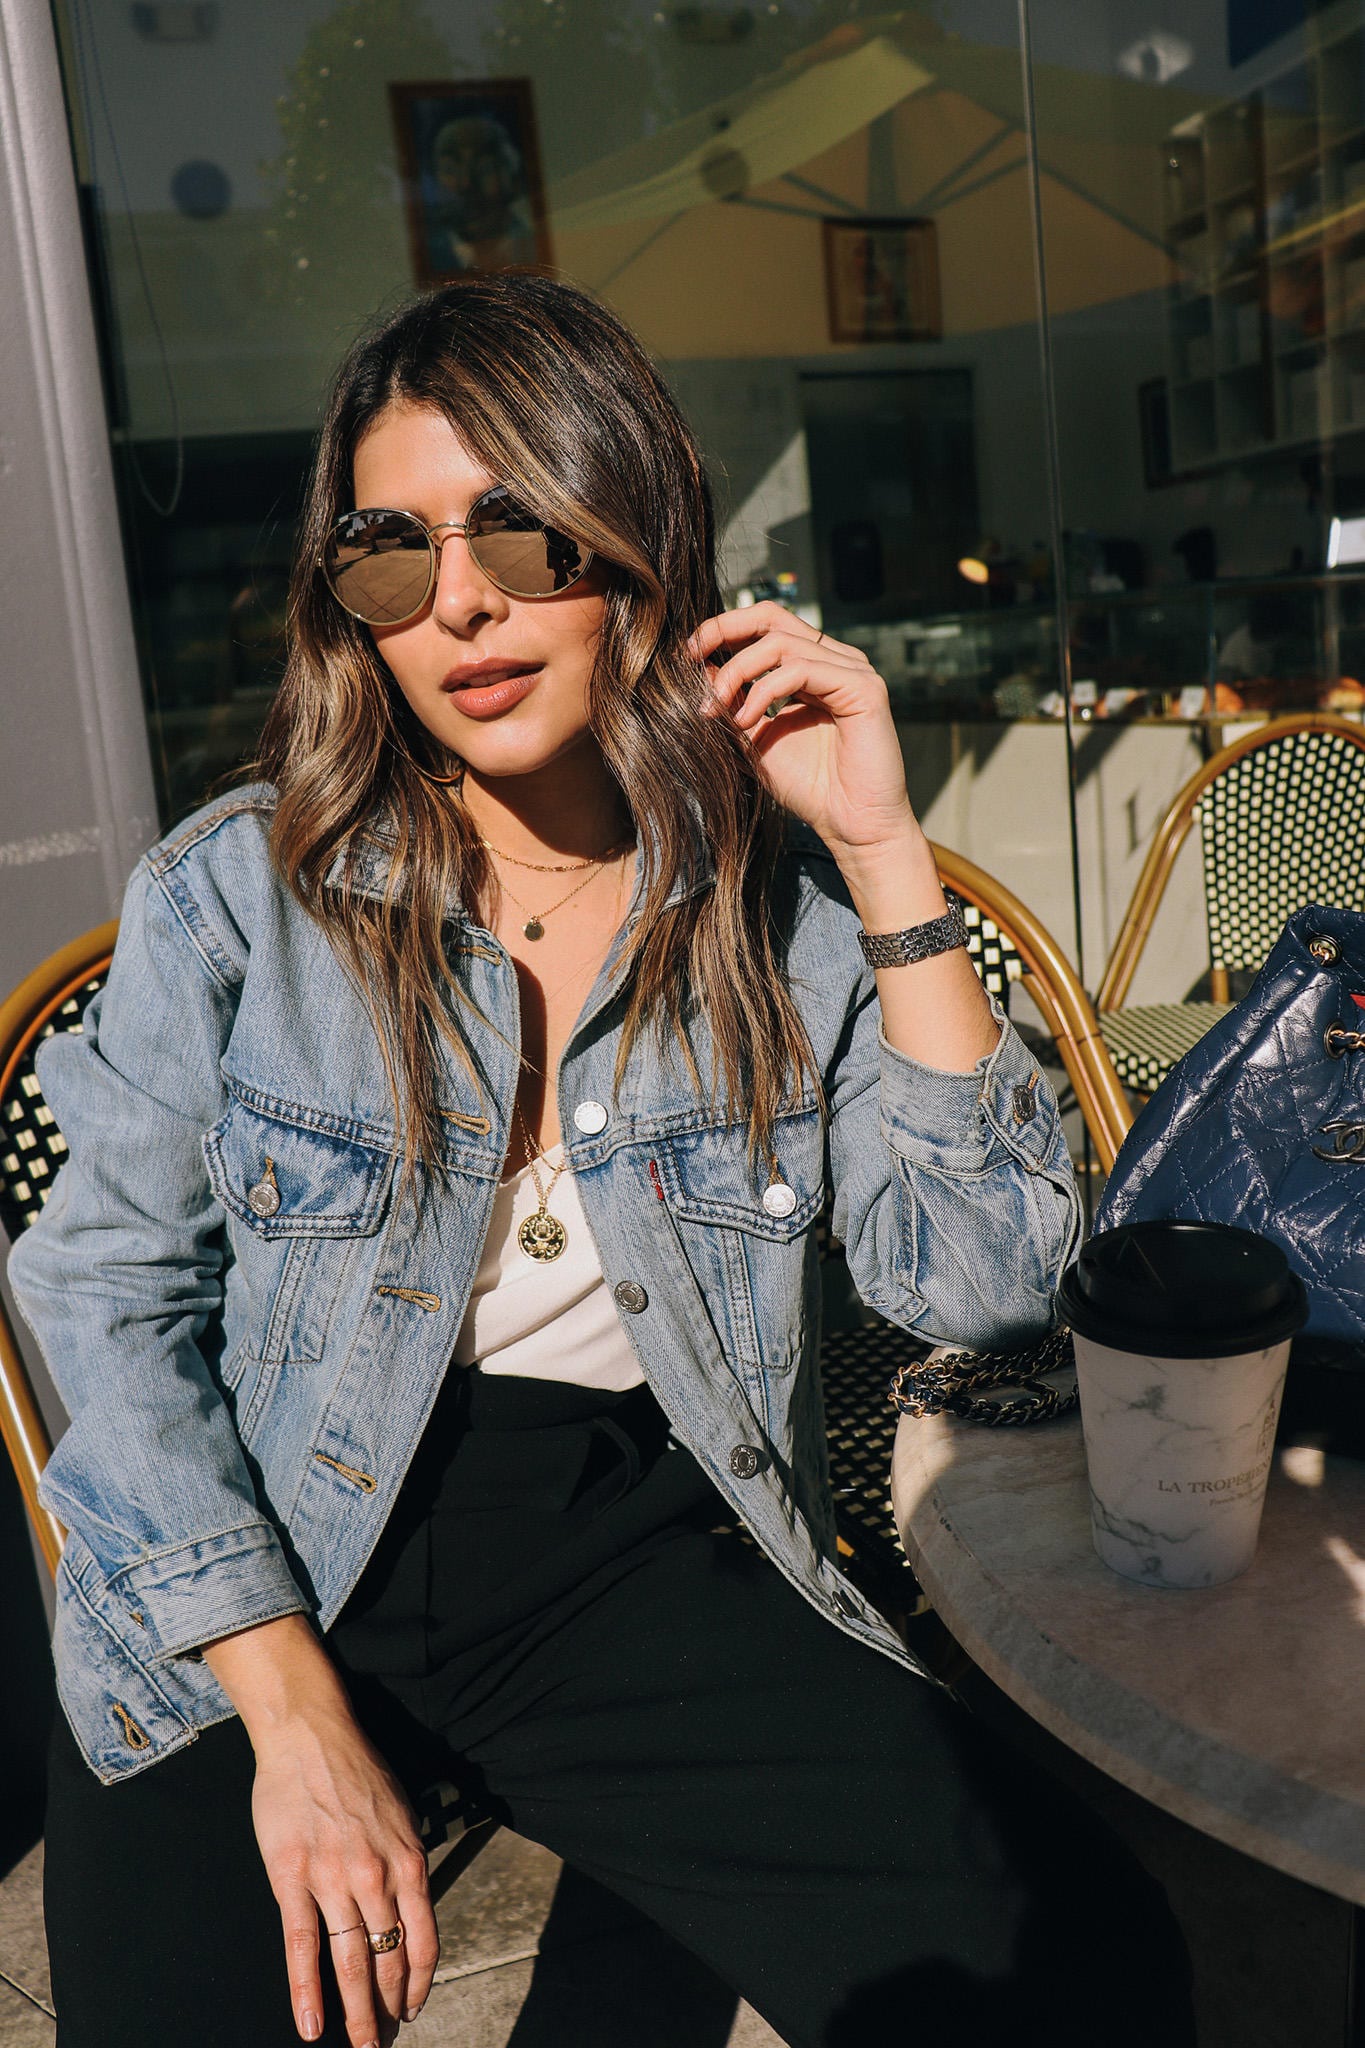 Denim Jacket with layered necklaces and round sunglasses